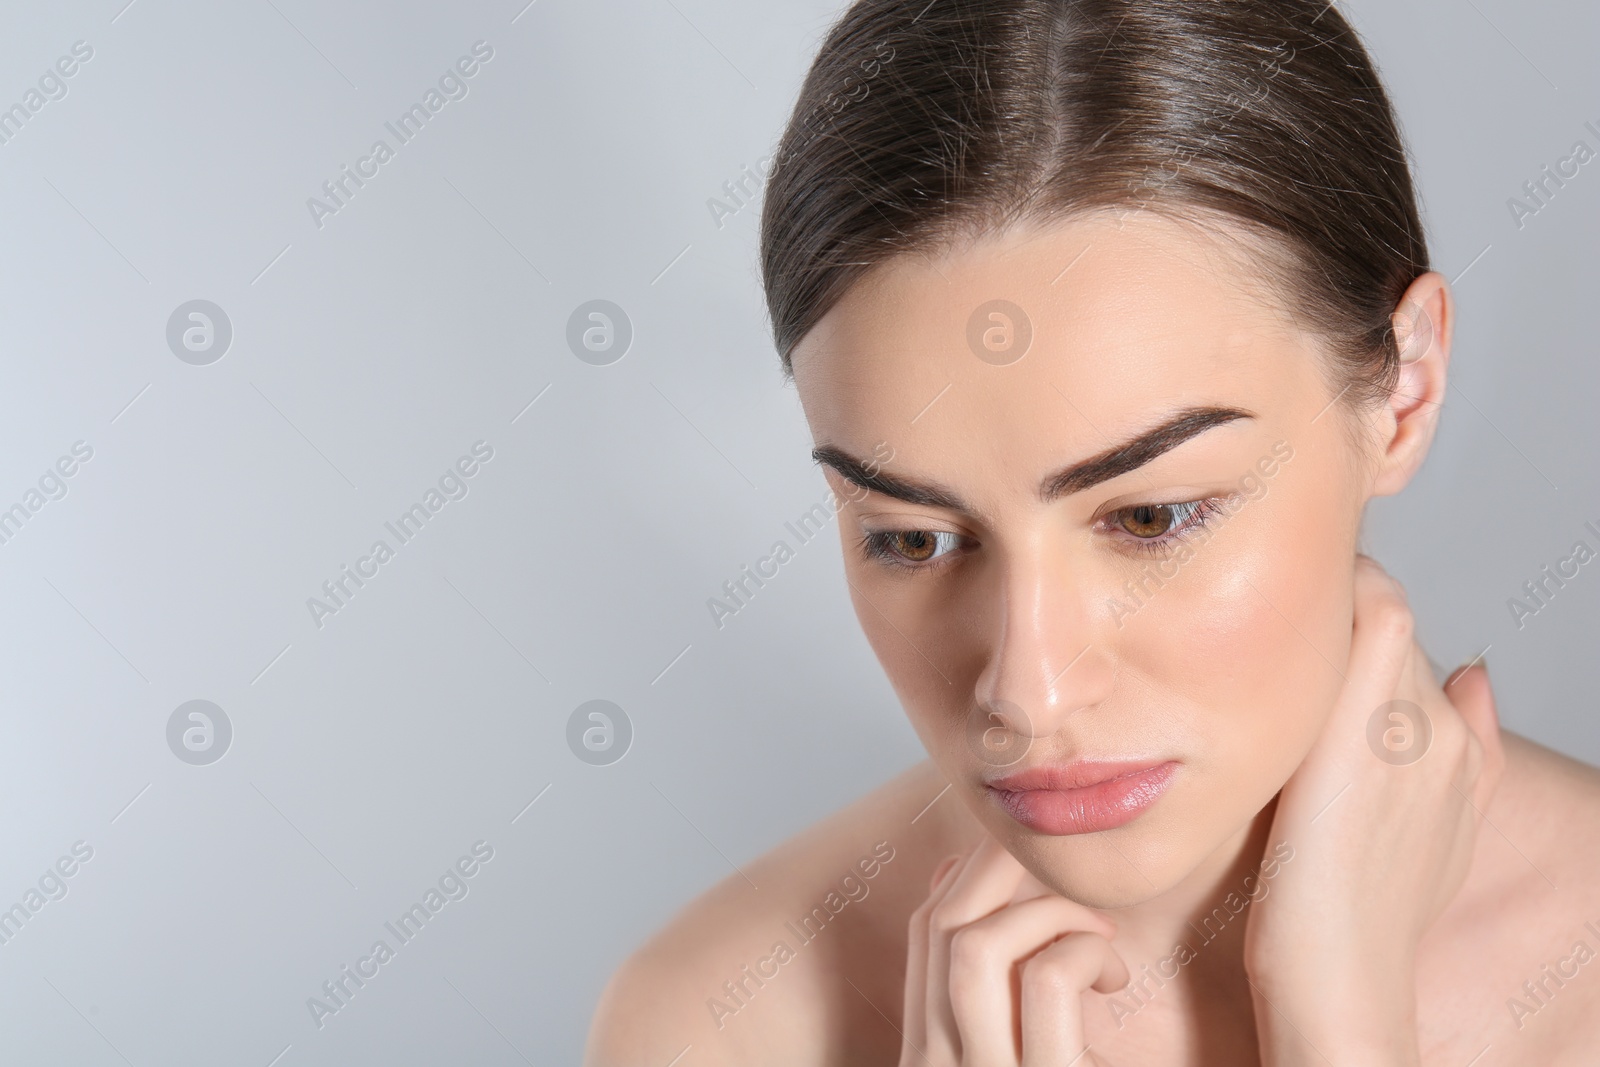 Photo of Beautiful woman with perfect eyebrows on light background